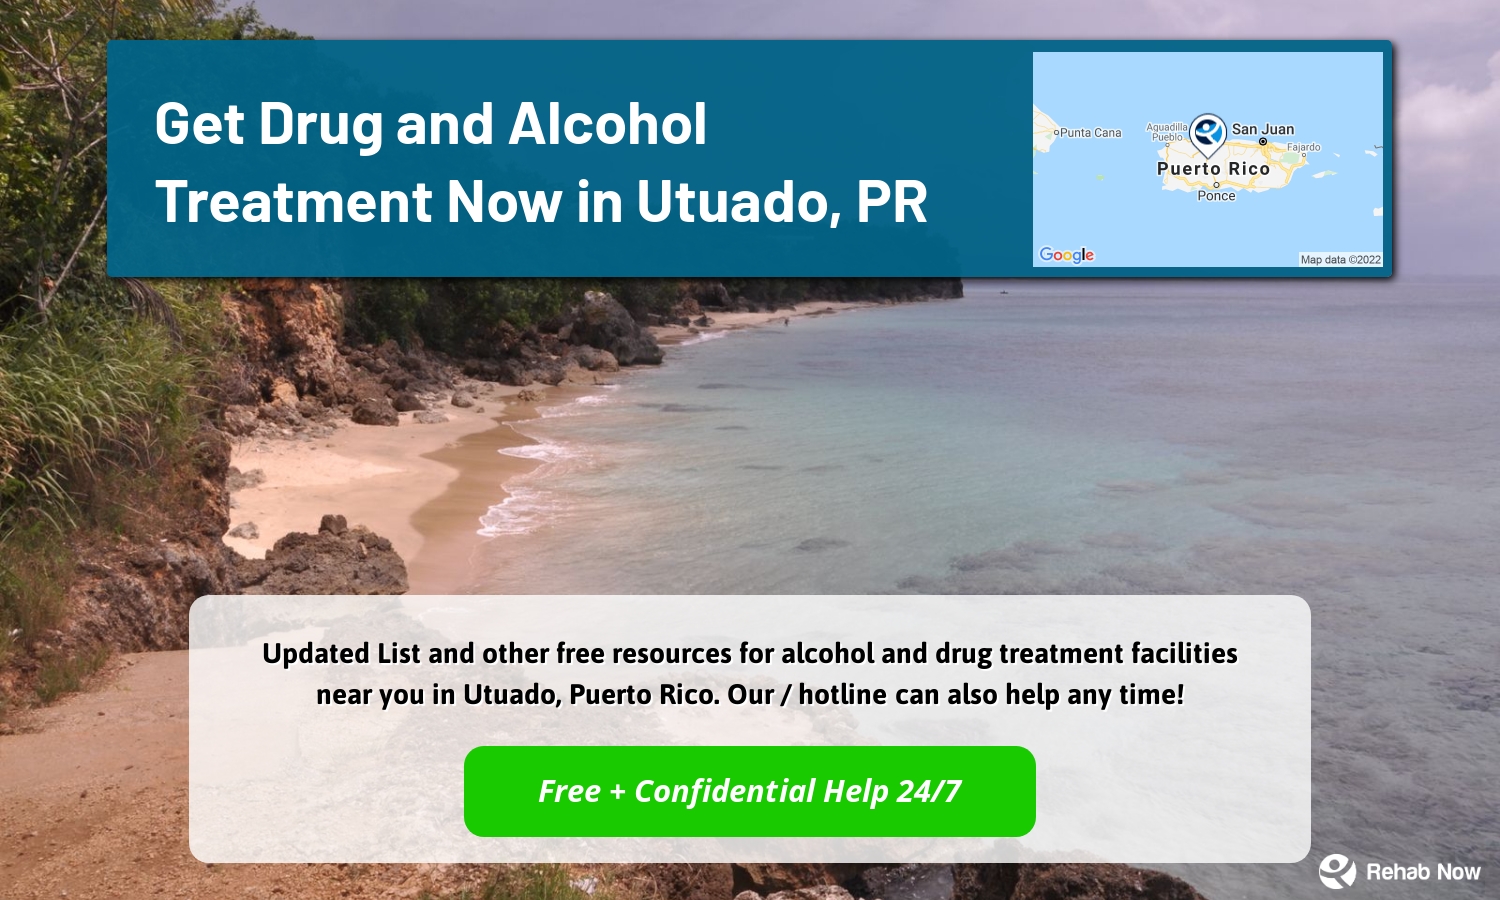  Updated List and other free resources for alcohol and drug treatment facilities near you in Utuado, Puerto Rico. Our / hotline can also help any time!